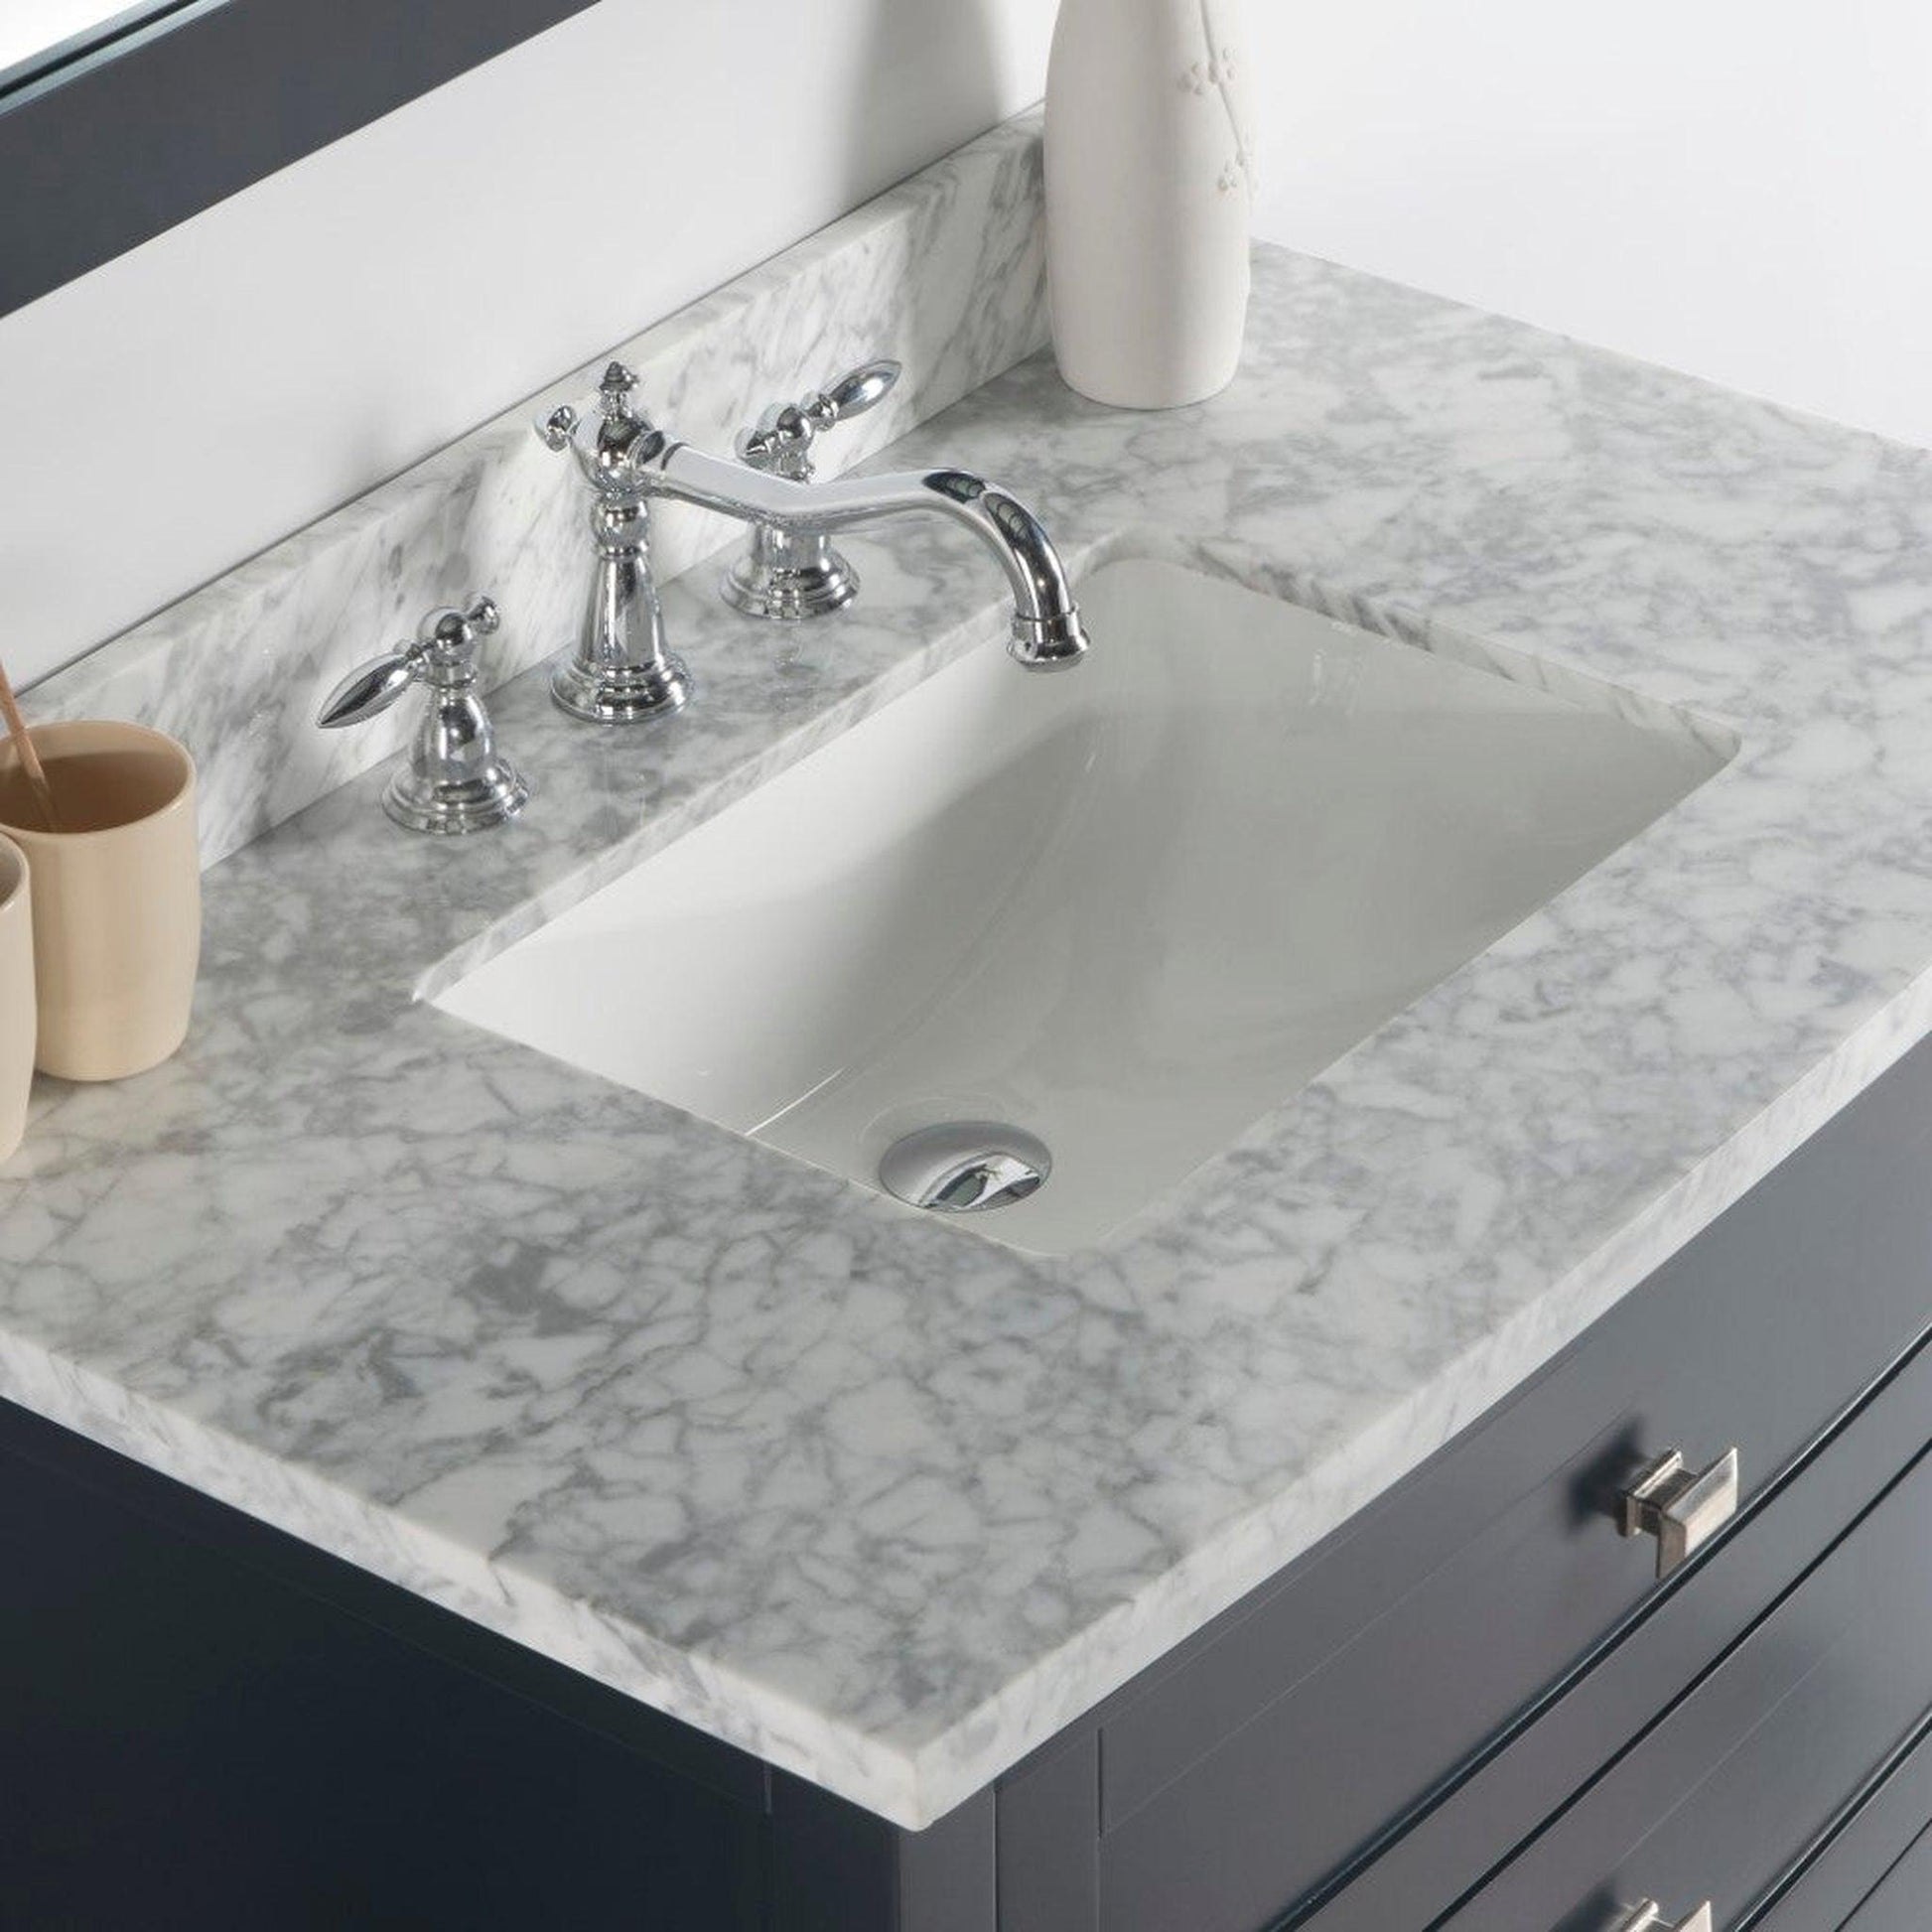 Timeless Home 36 in. W Single Bathroom Vanity in Clear Mirror with Vanity  Top in White with White Basin